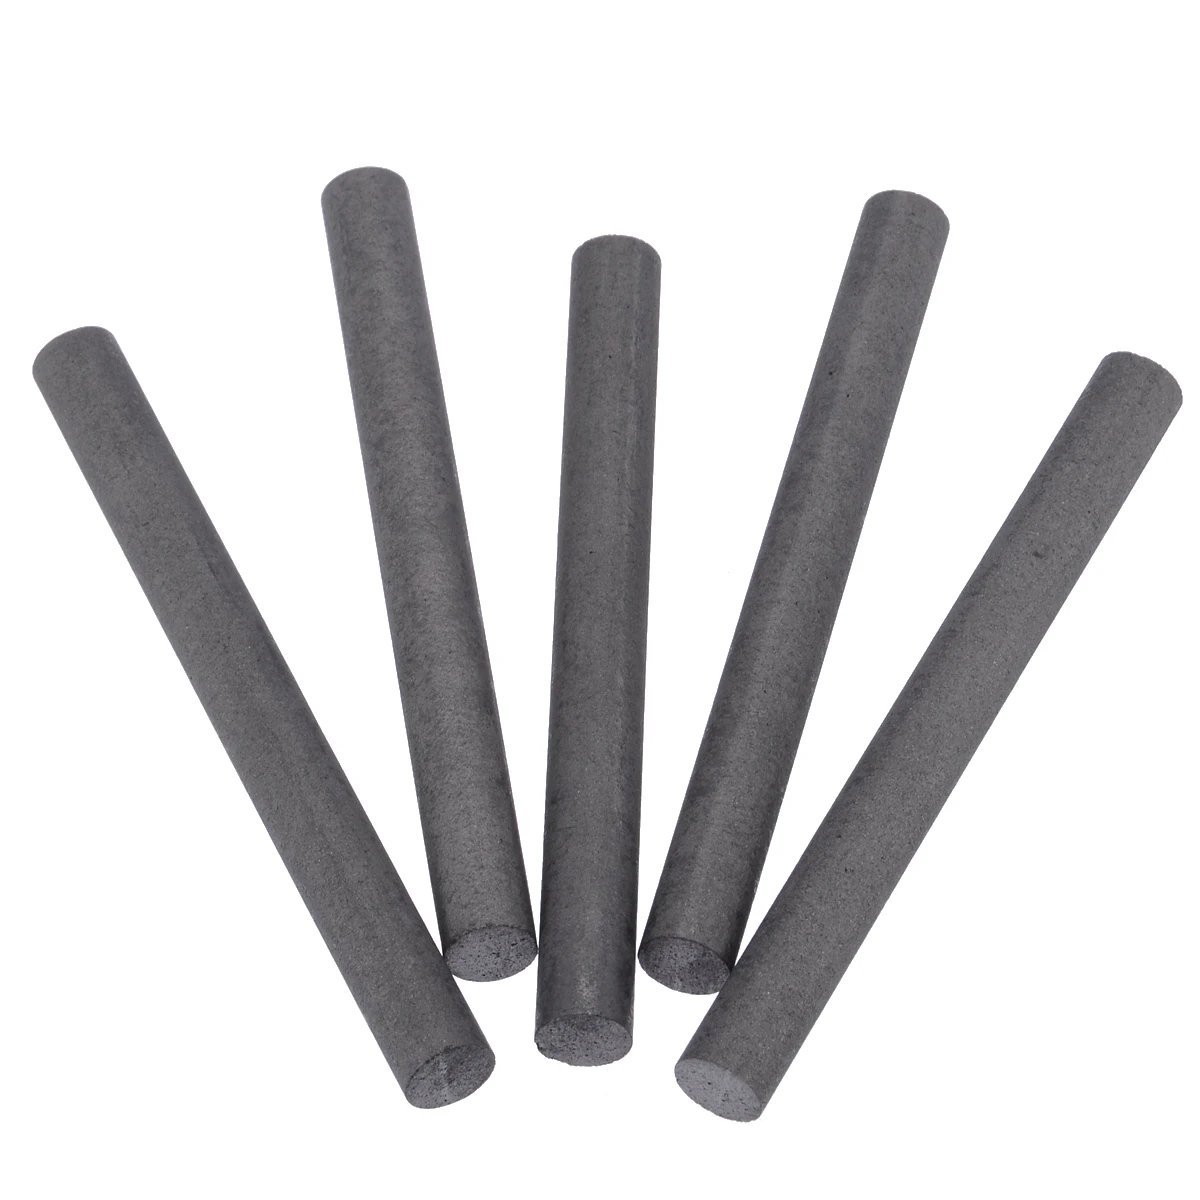 

5pcs/Set High Purity 99.99% Graphite Electrode Cylinder Rods Bars Light Industry Material High Quality Black Carbon Rod 100x10mm